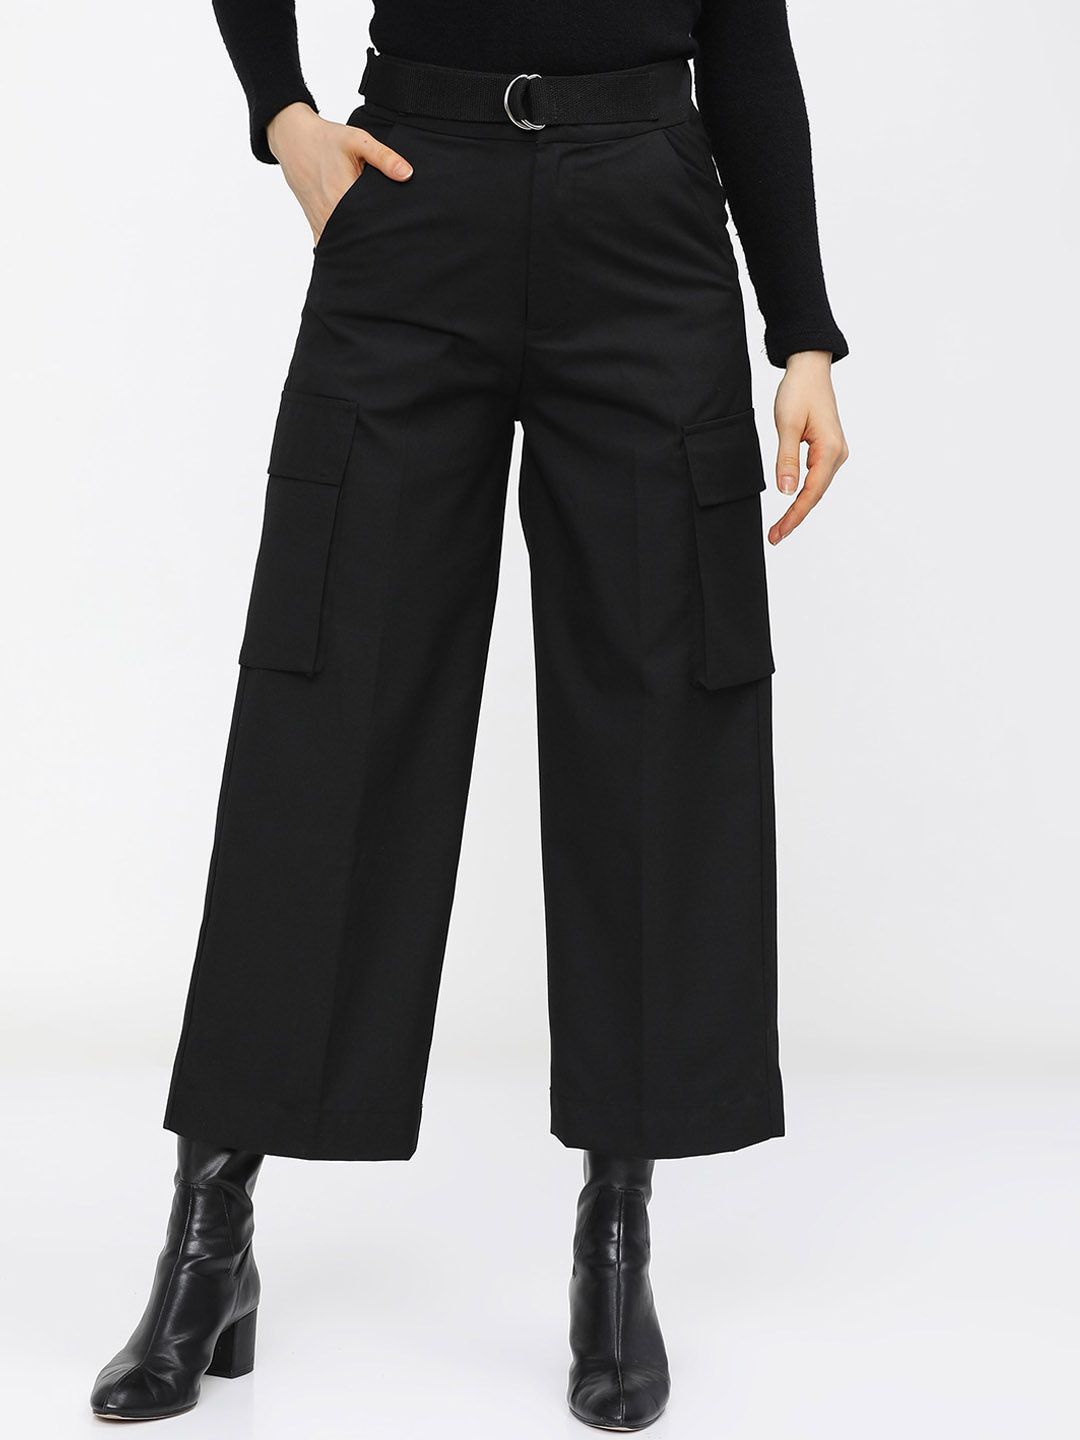 Tokyo Talkies Women Black Straight Fit Cargos Trousers Price in India